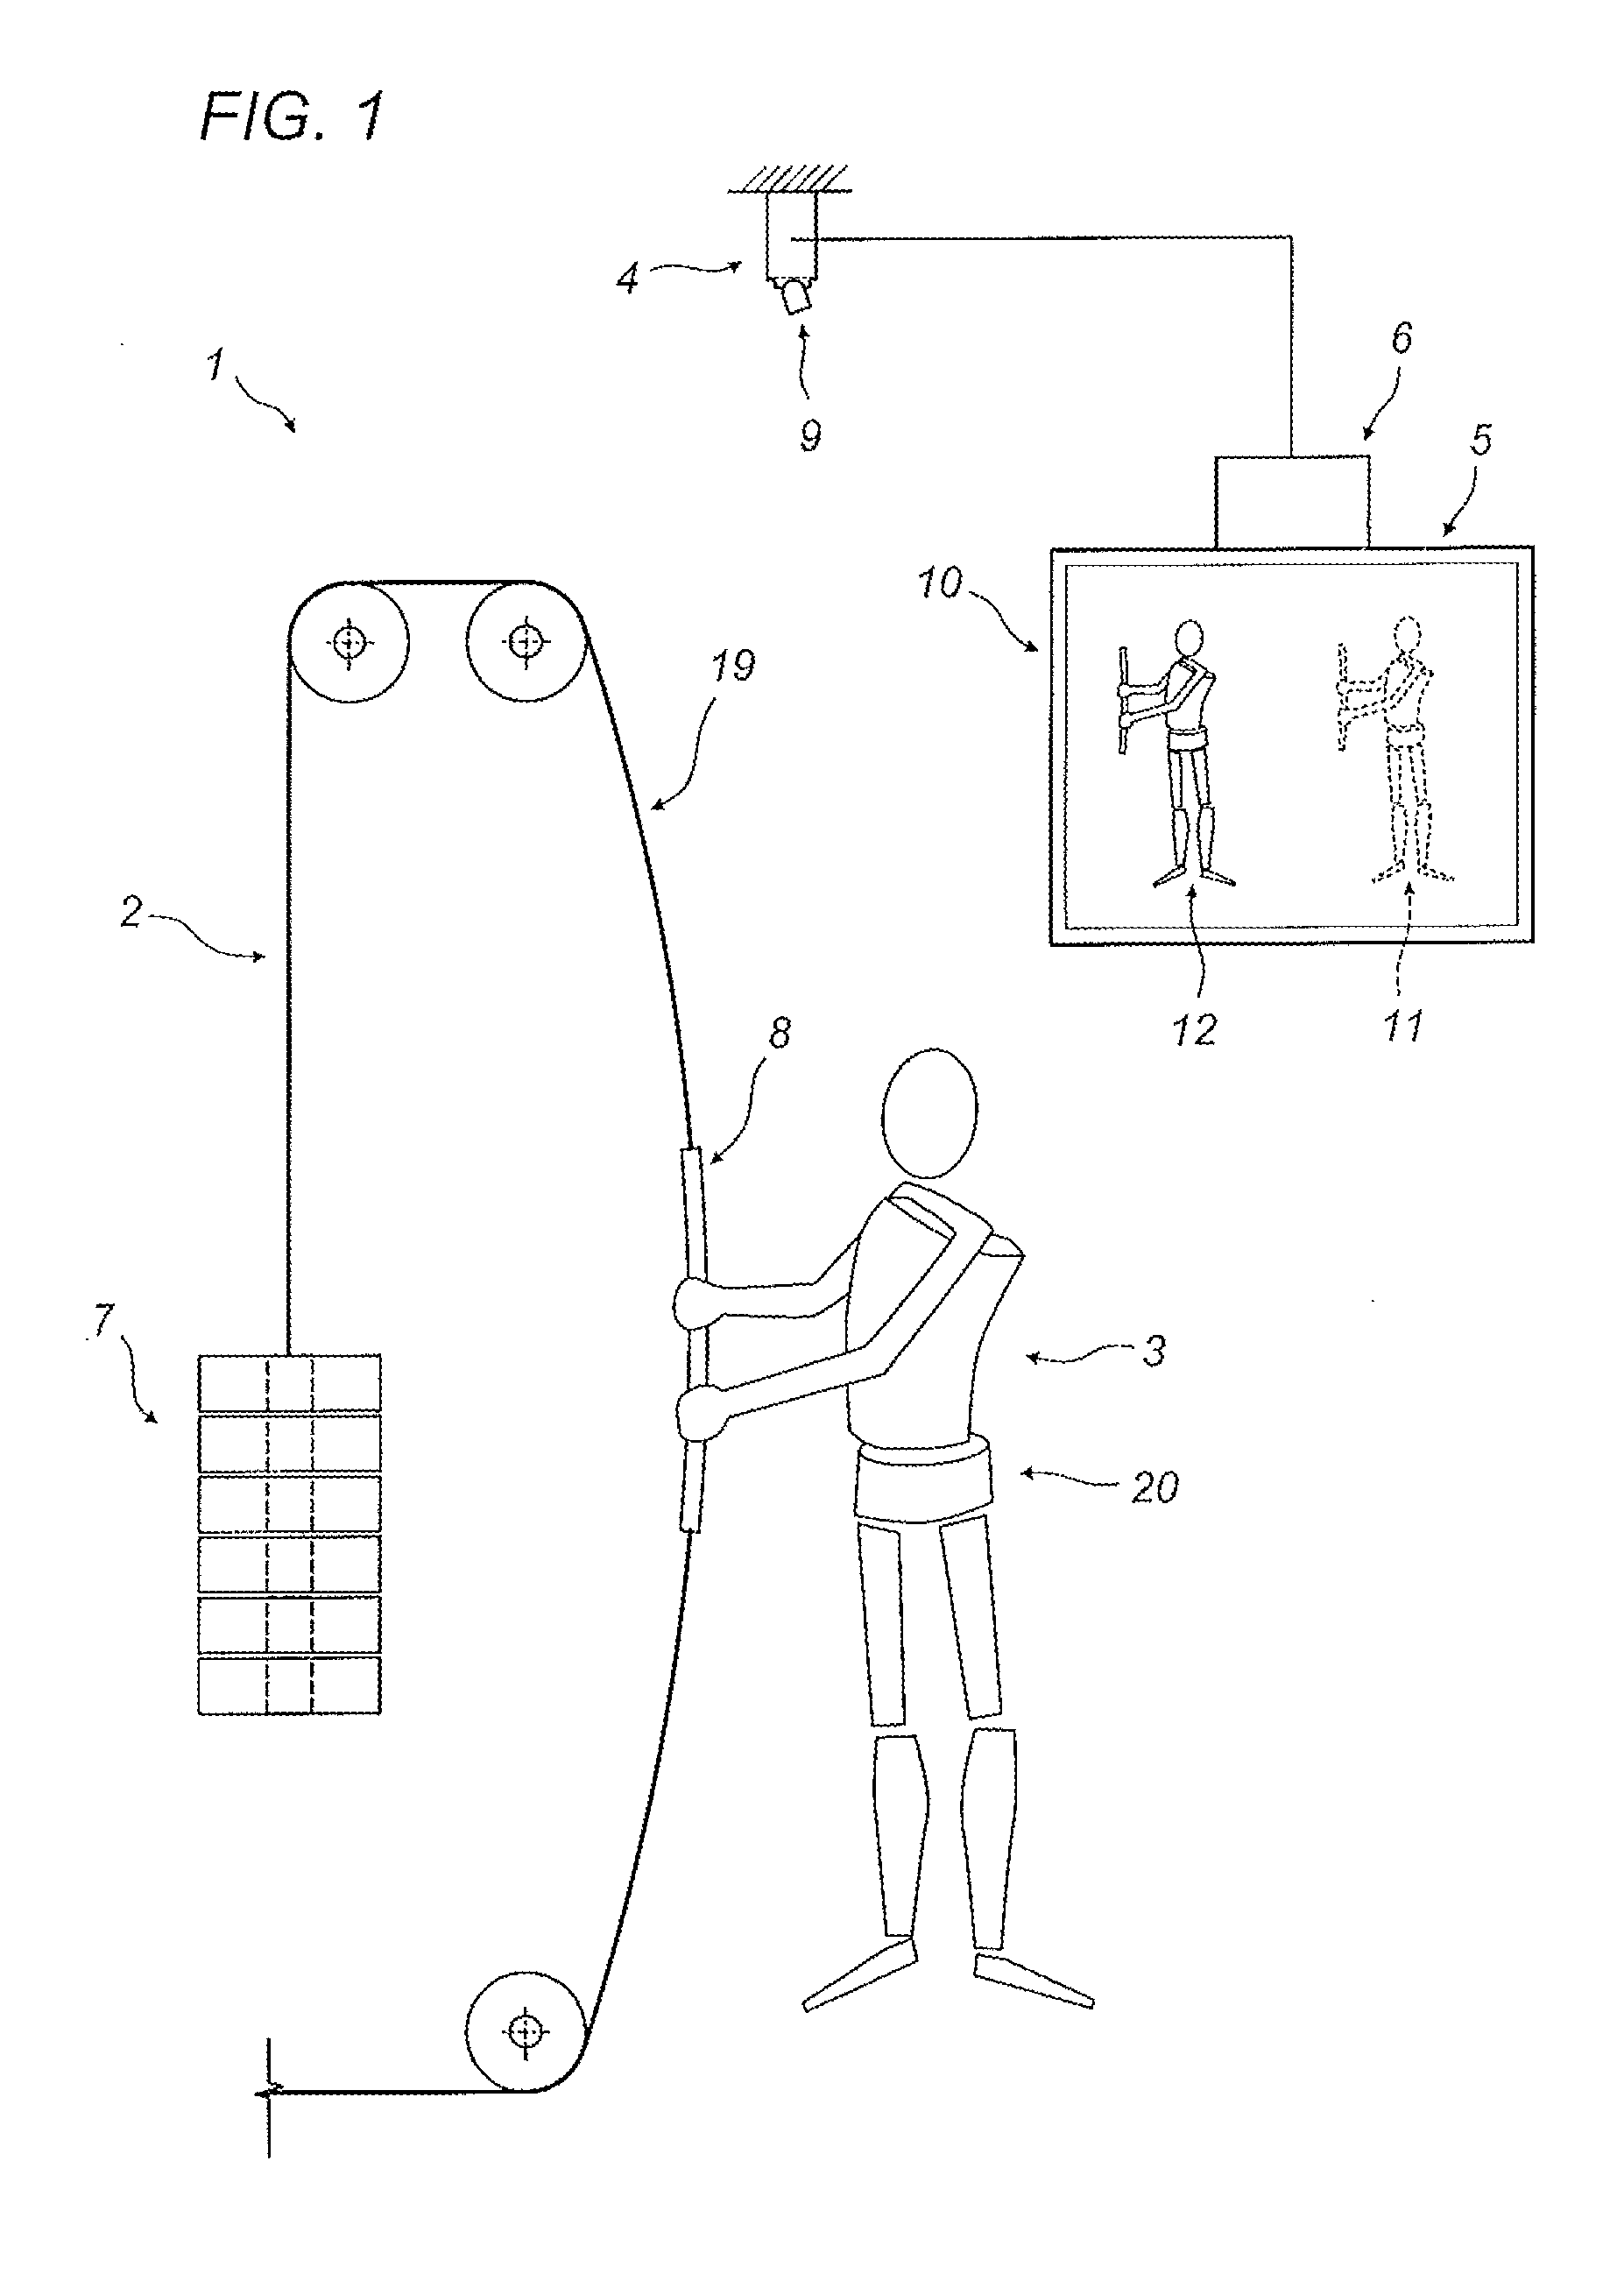 Apparatus for the assisted performance of a fitness exercise